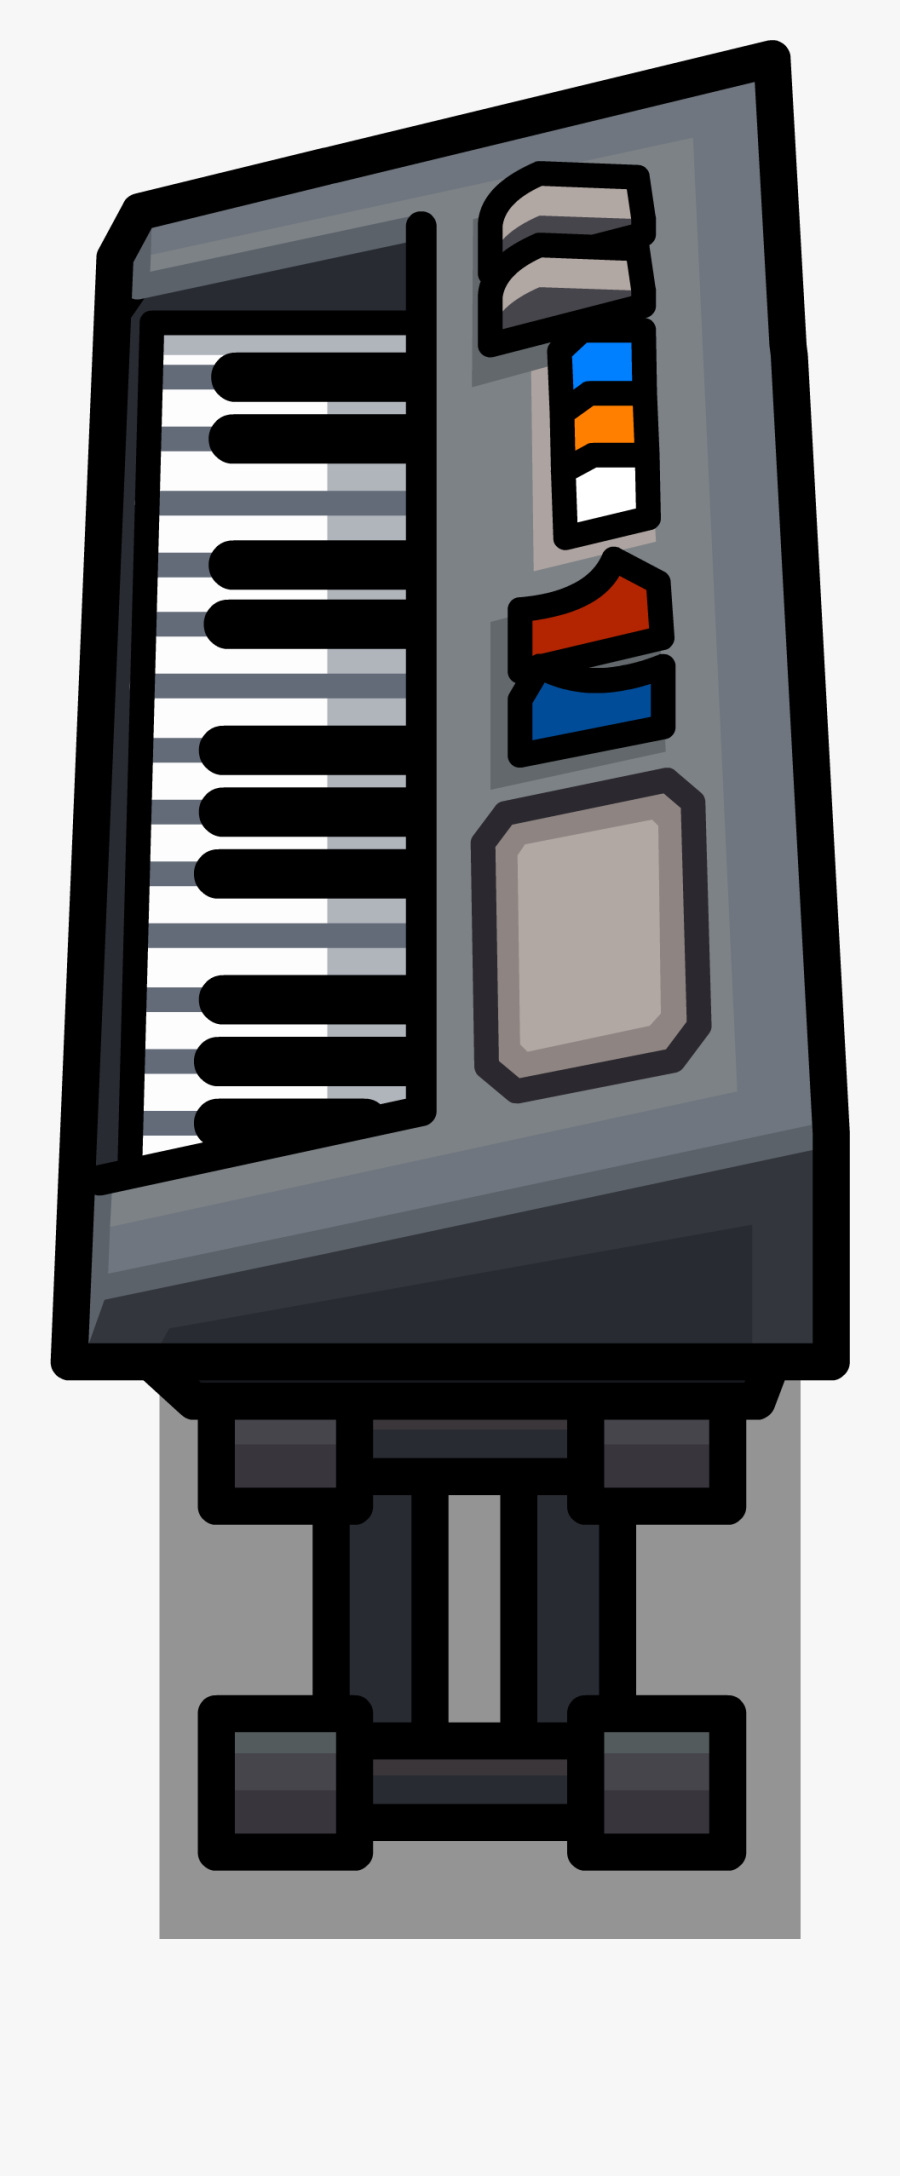 Image Sprite Png Club - Musical Keyboard, Transparent Clipart